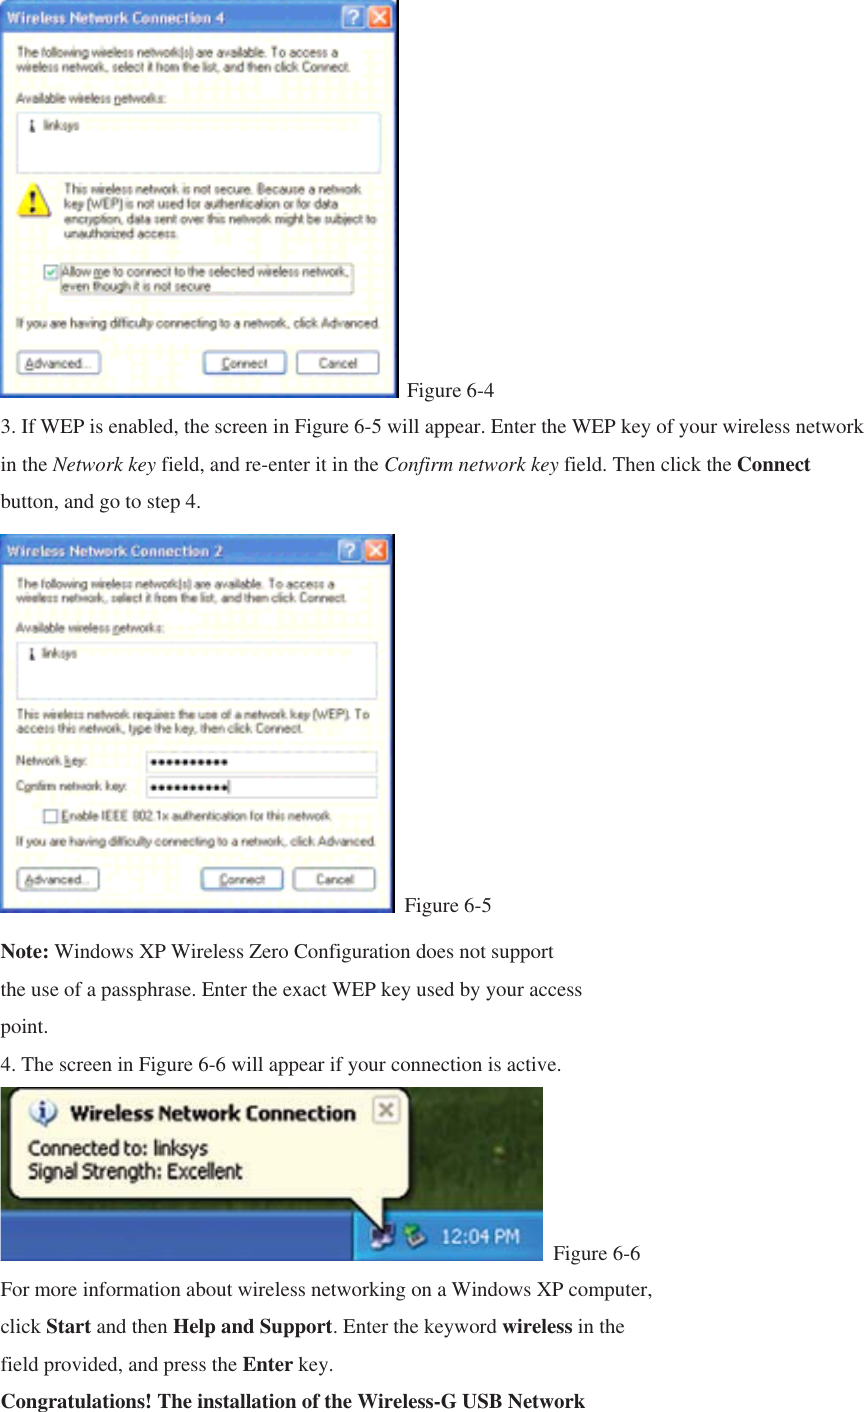  Figure 6-4 3. If WEP is enabled, the screen in Figure 6-5 will appear. Enter the WEP key of your wireless network in the Network key field, and re-enter it in the Confirm network key field. Then click the Connect button, and go to step 4.  Figure 6-5 Note: Windows XP Wireless Zero Configuration does not support the use of a passphrase. Enter the exact WEP key used by your access point. 4. The screen in Figure 6-6 will appear if your connection is active.  Figure 6-6 For more information about wireless networking on a Windows XP computer, click Start and then Help and Support. Enter the keyword wireless in the field provided, and press the Enter key. Congratulations! The installation of the Wireless-G USB Network 